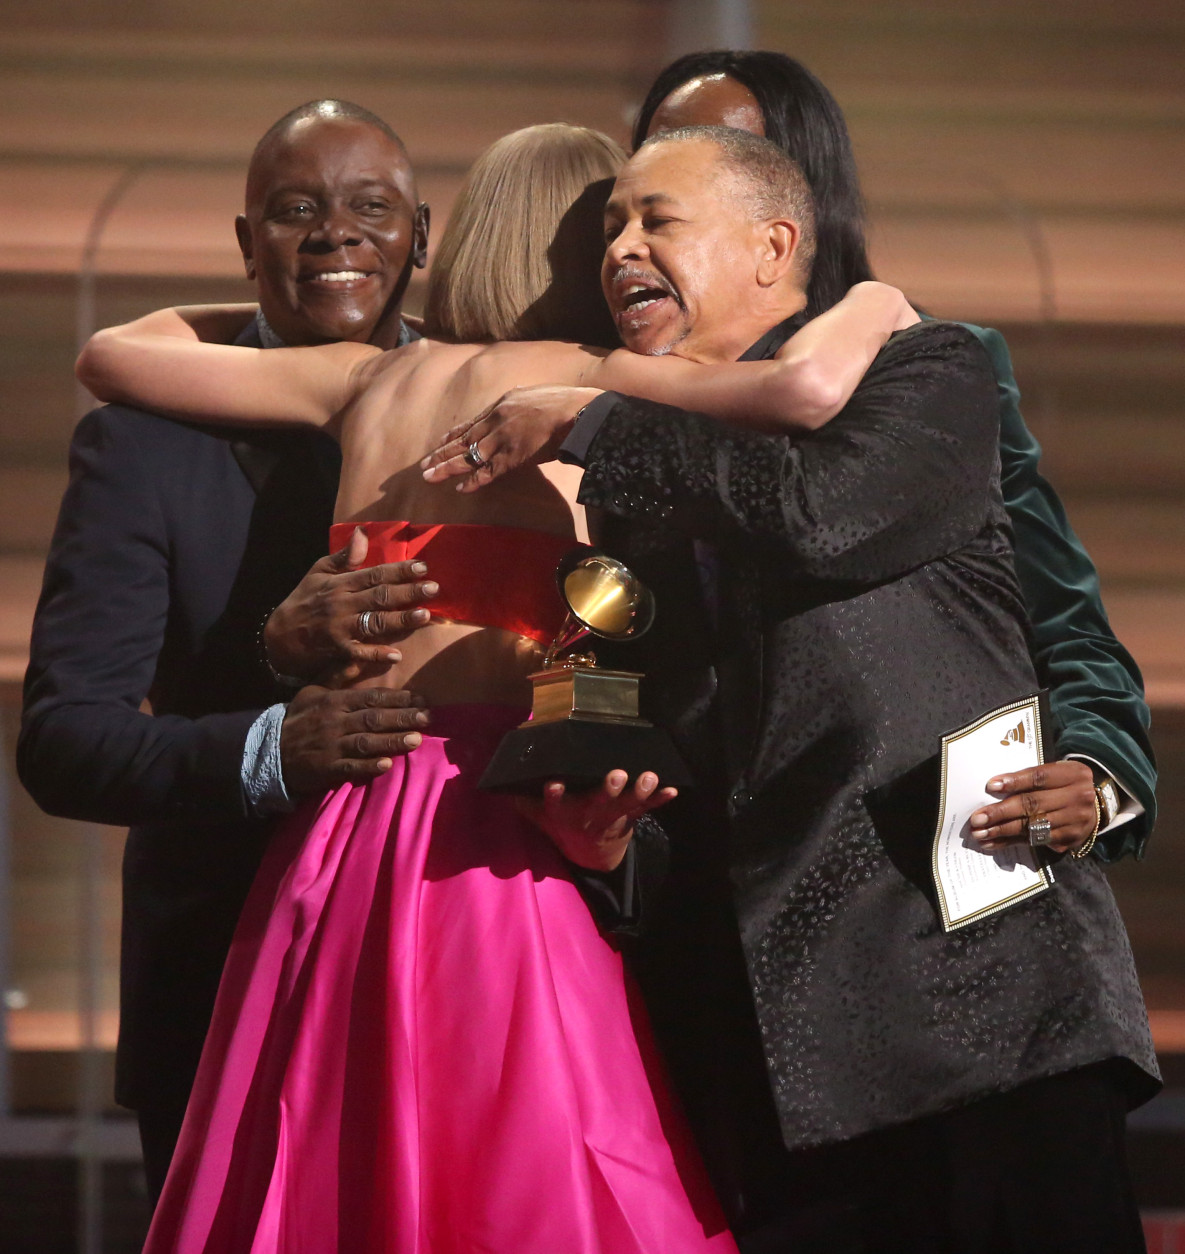 Philip Bailey, from left, Verdine White, obscured, and Ralph Johnson of Earth Wind &amp; Fire present Taylor Swift the award for album of the year for 1989 at the 58th annual Grammy Awards on Monday, Feb. 15, 2016, in Los Angeles. (Photo by Matt Sayles/Invision/AP)